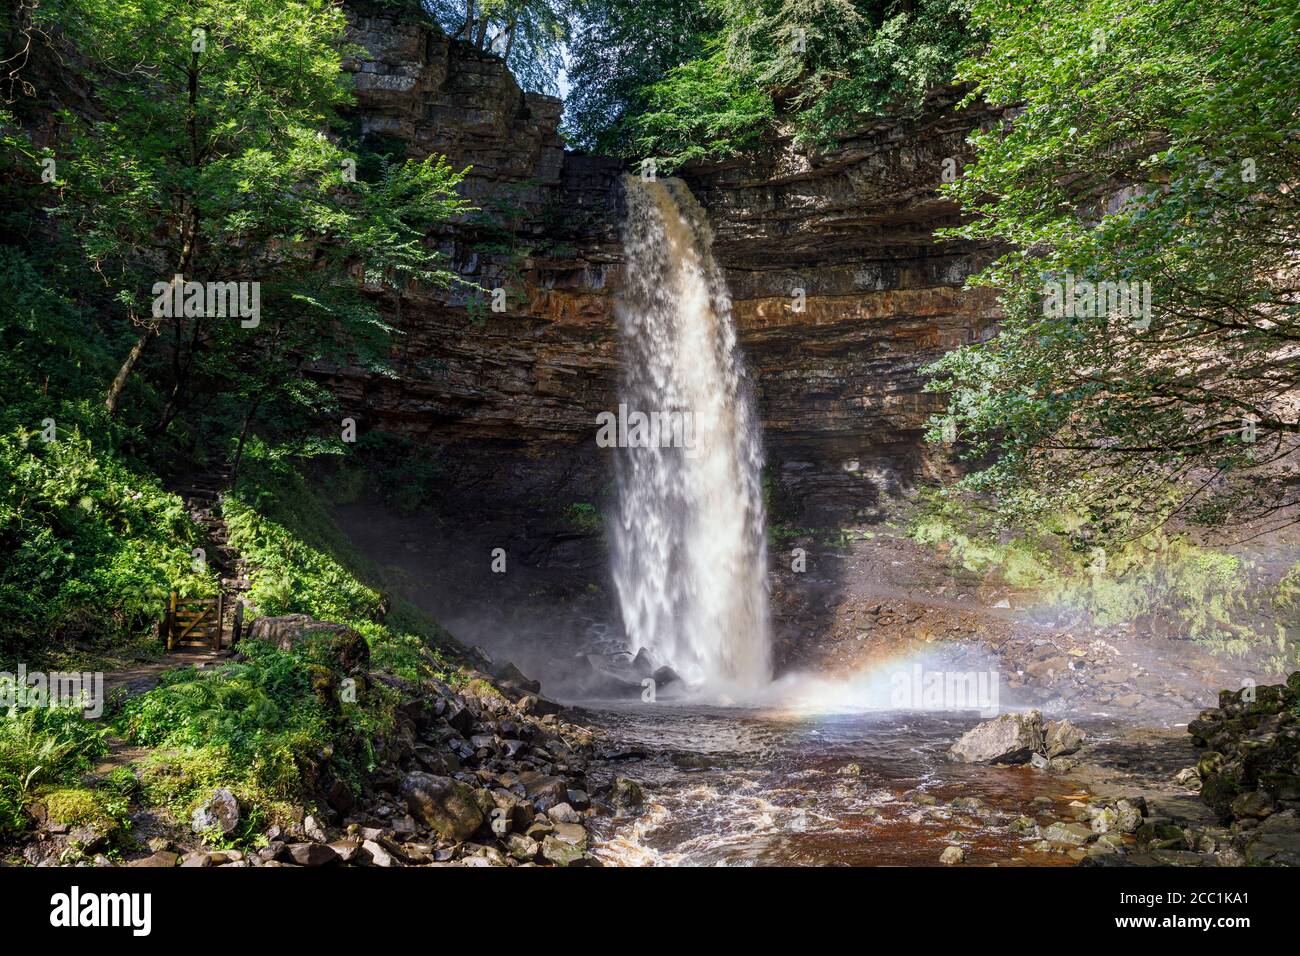 A rainbow created by the spray at Hardraw Force, Wensleydale, Yorkshire Dales National Park, England Stock Photo